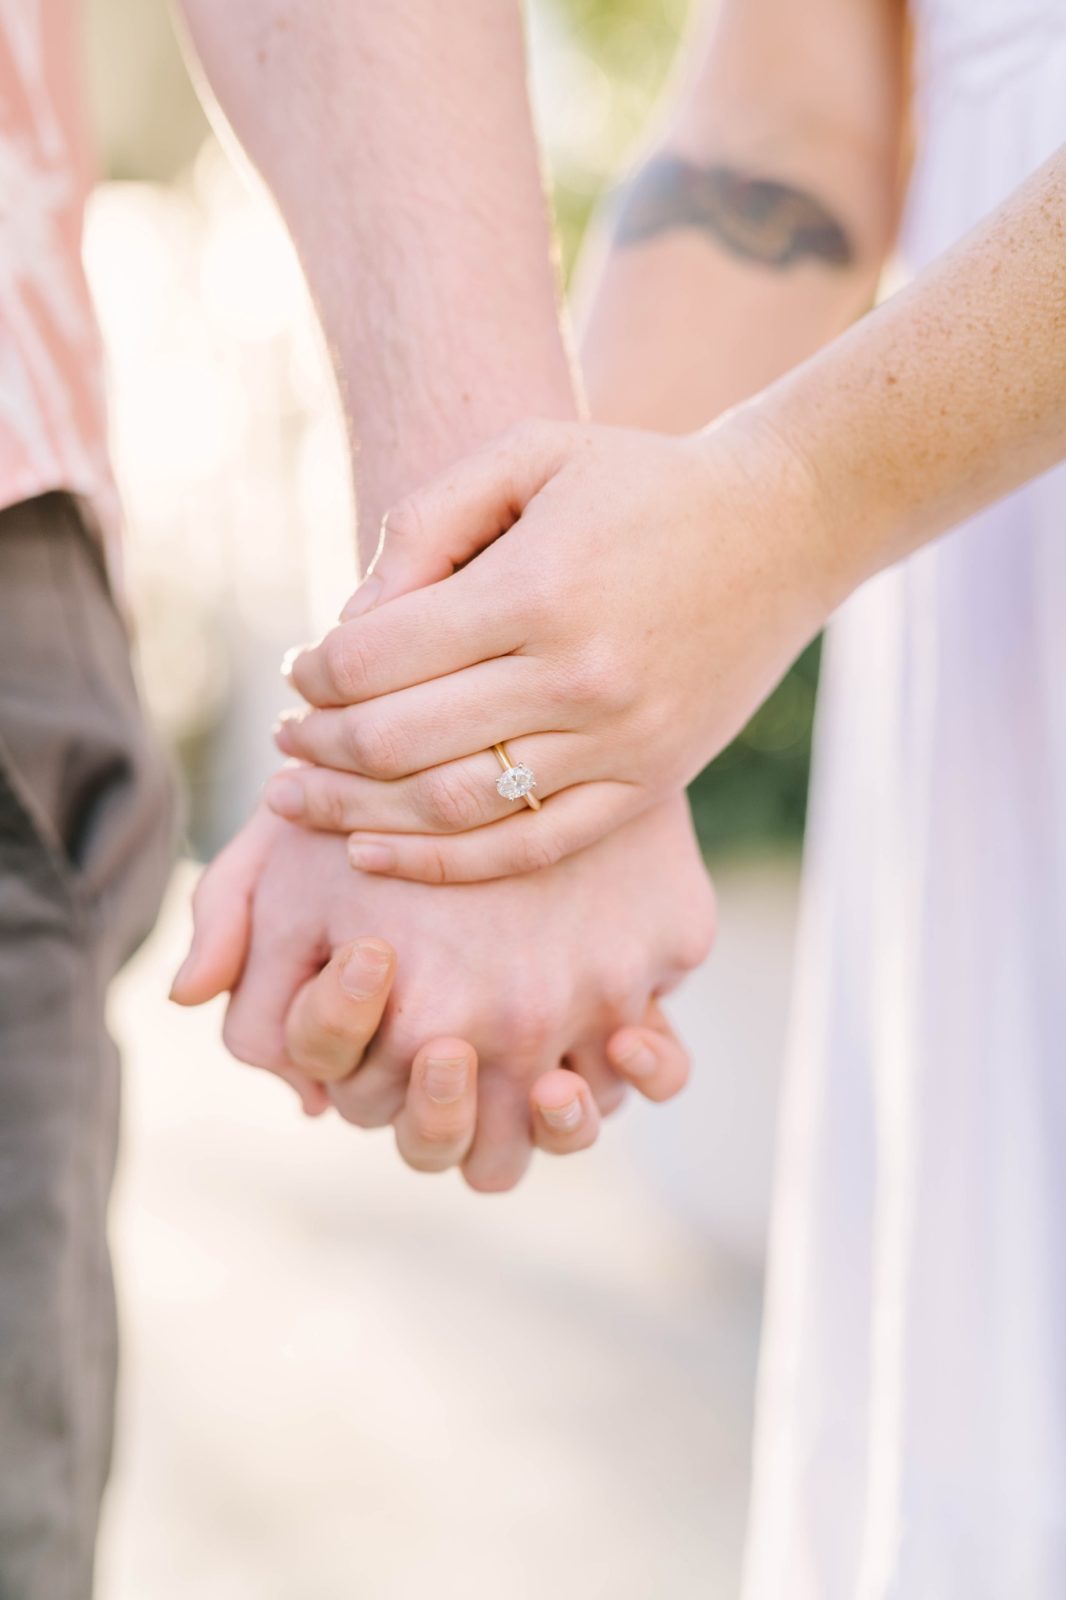 Detailed portrait of a man and woman holding hands wearing gold wedding rings by Christina Elliott Photography. gold ring with oval diamond #ChristinaElliottPhotography #ChristinaElliottEngagements #TheTremontHouse #Texasengagements #shesaidyes